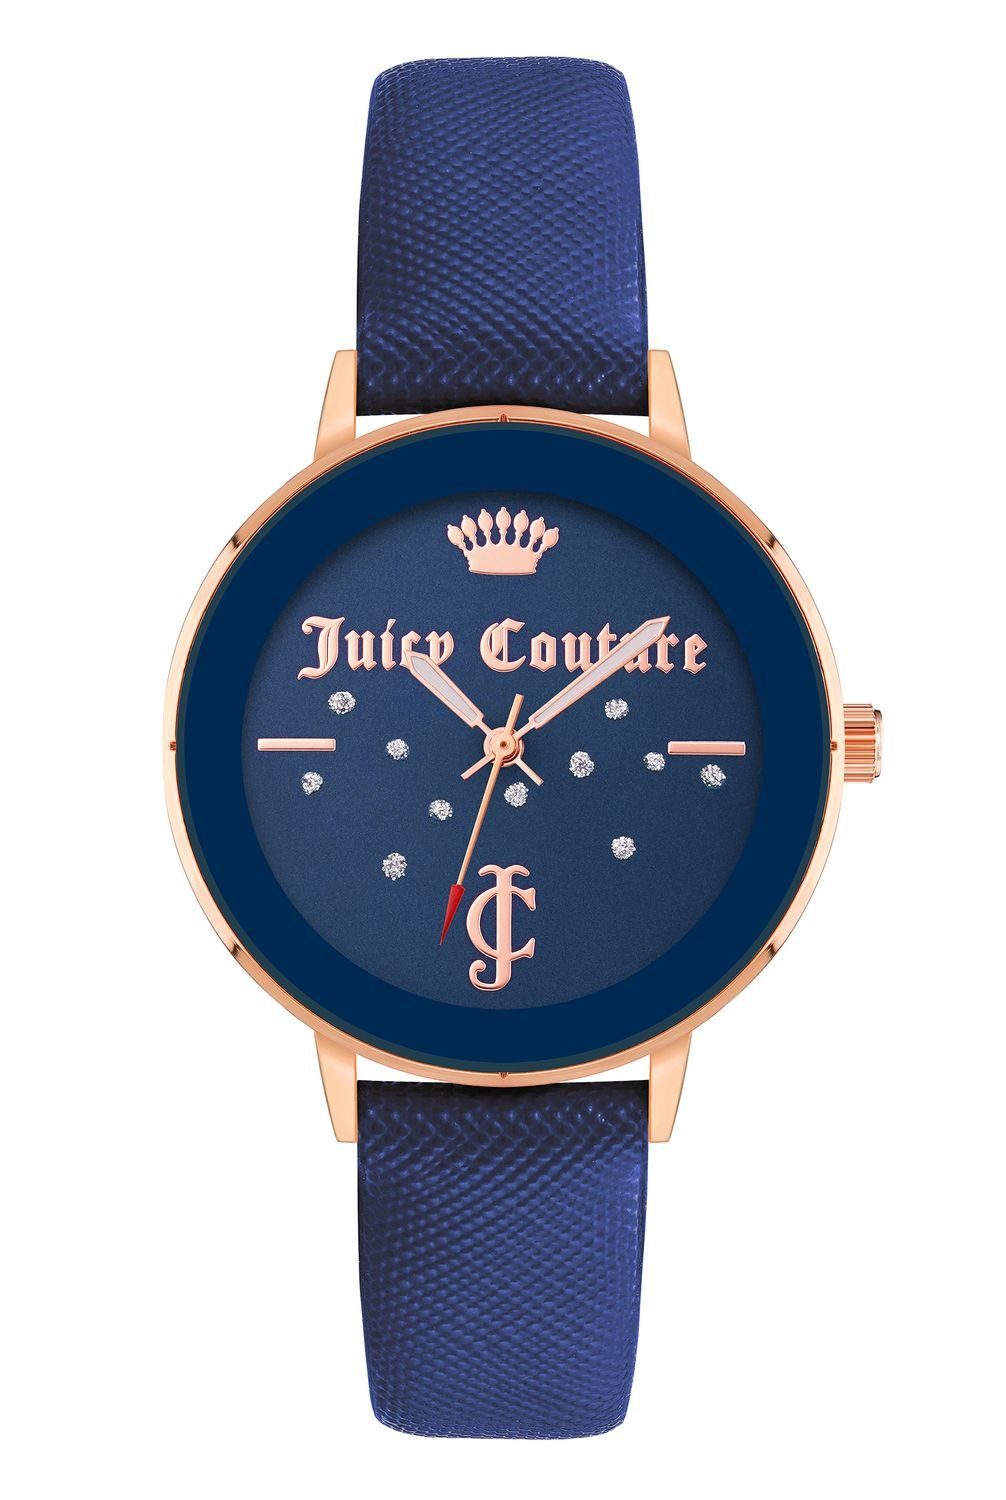 Juicy Couture Digitaluhr JC/1264RGNV